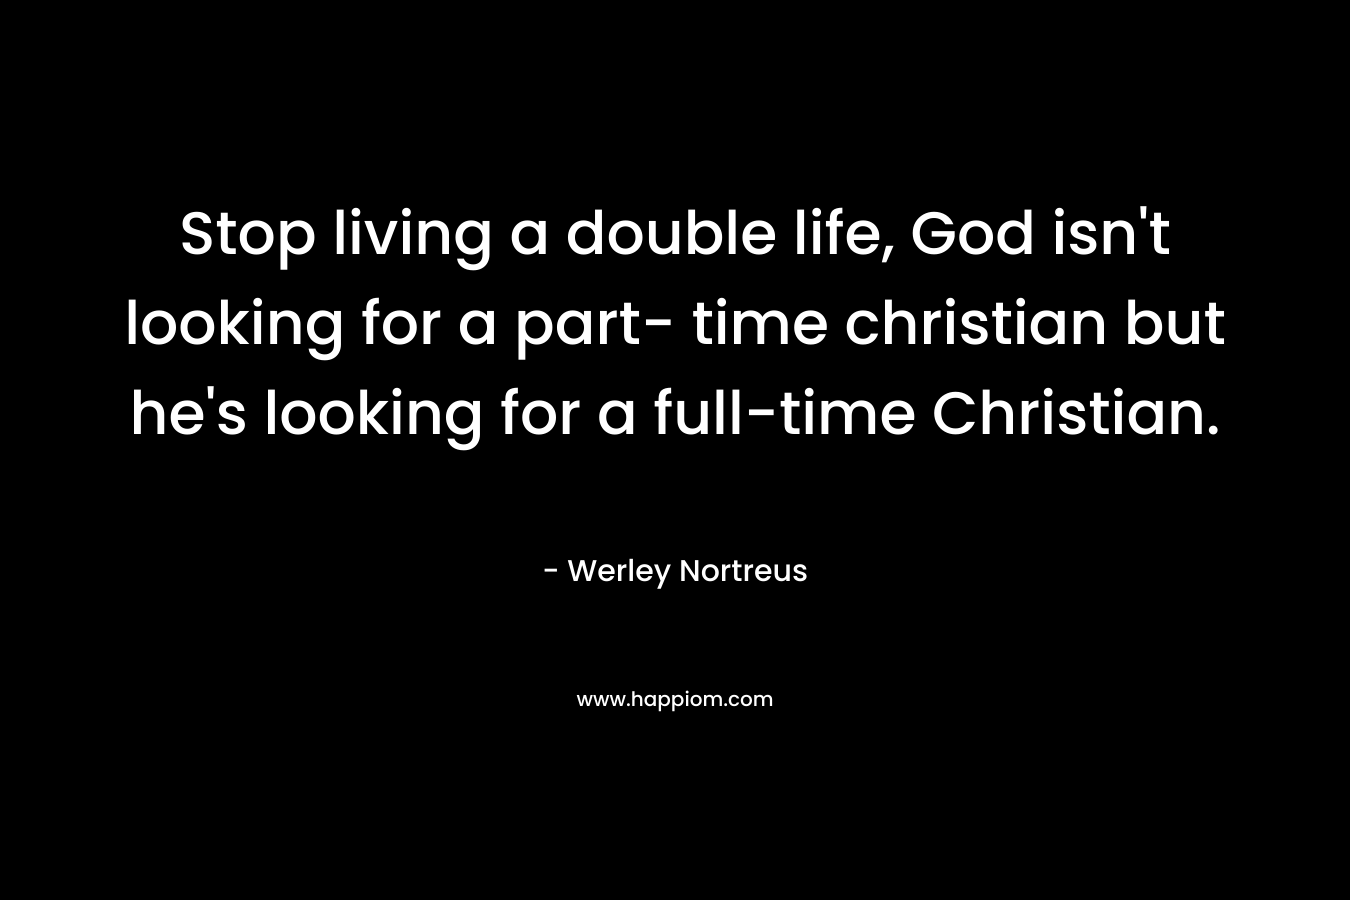 Stop living a double life, God isn't looking for a part- time christian but he's looking for a full-time Christian.